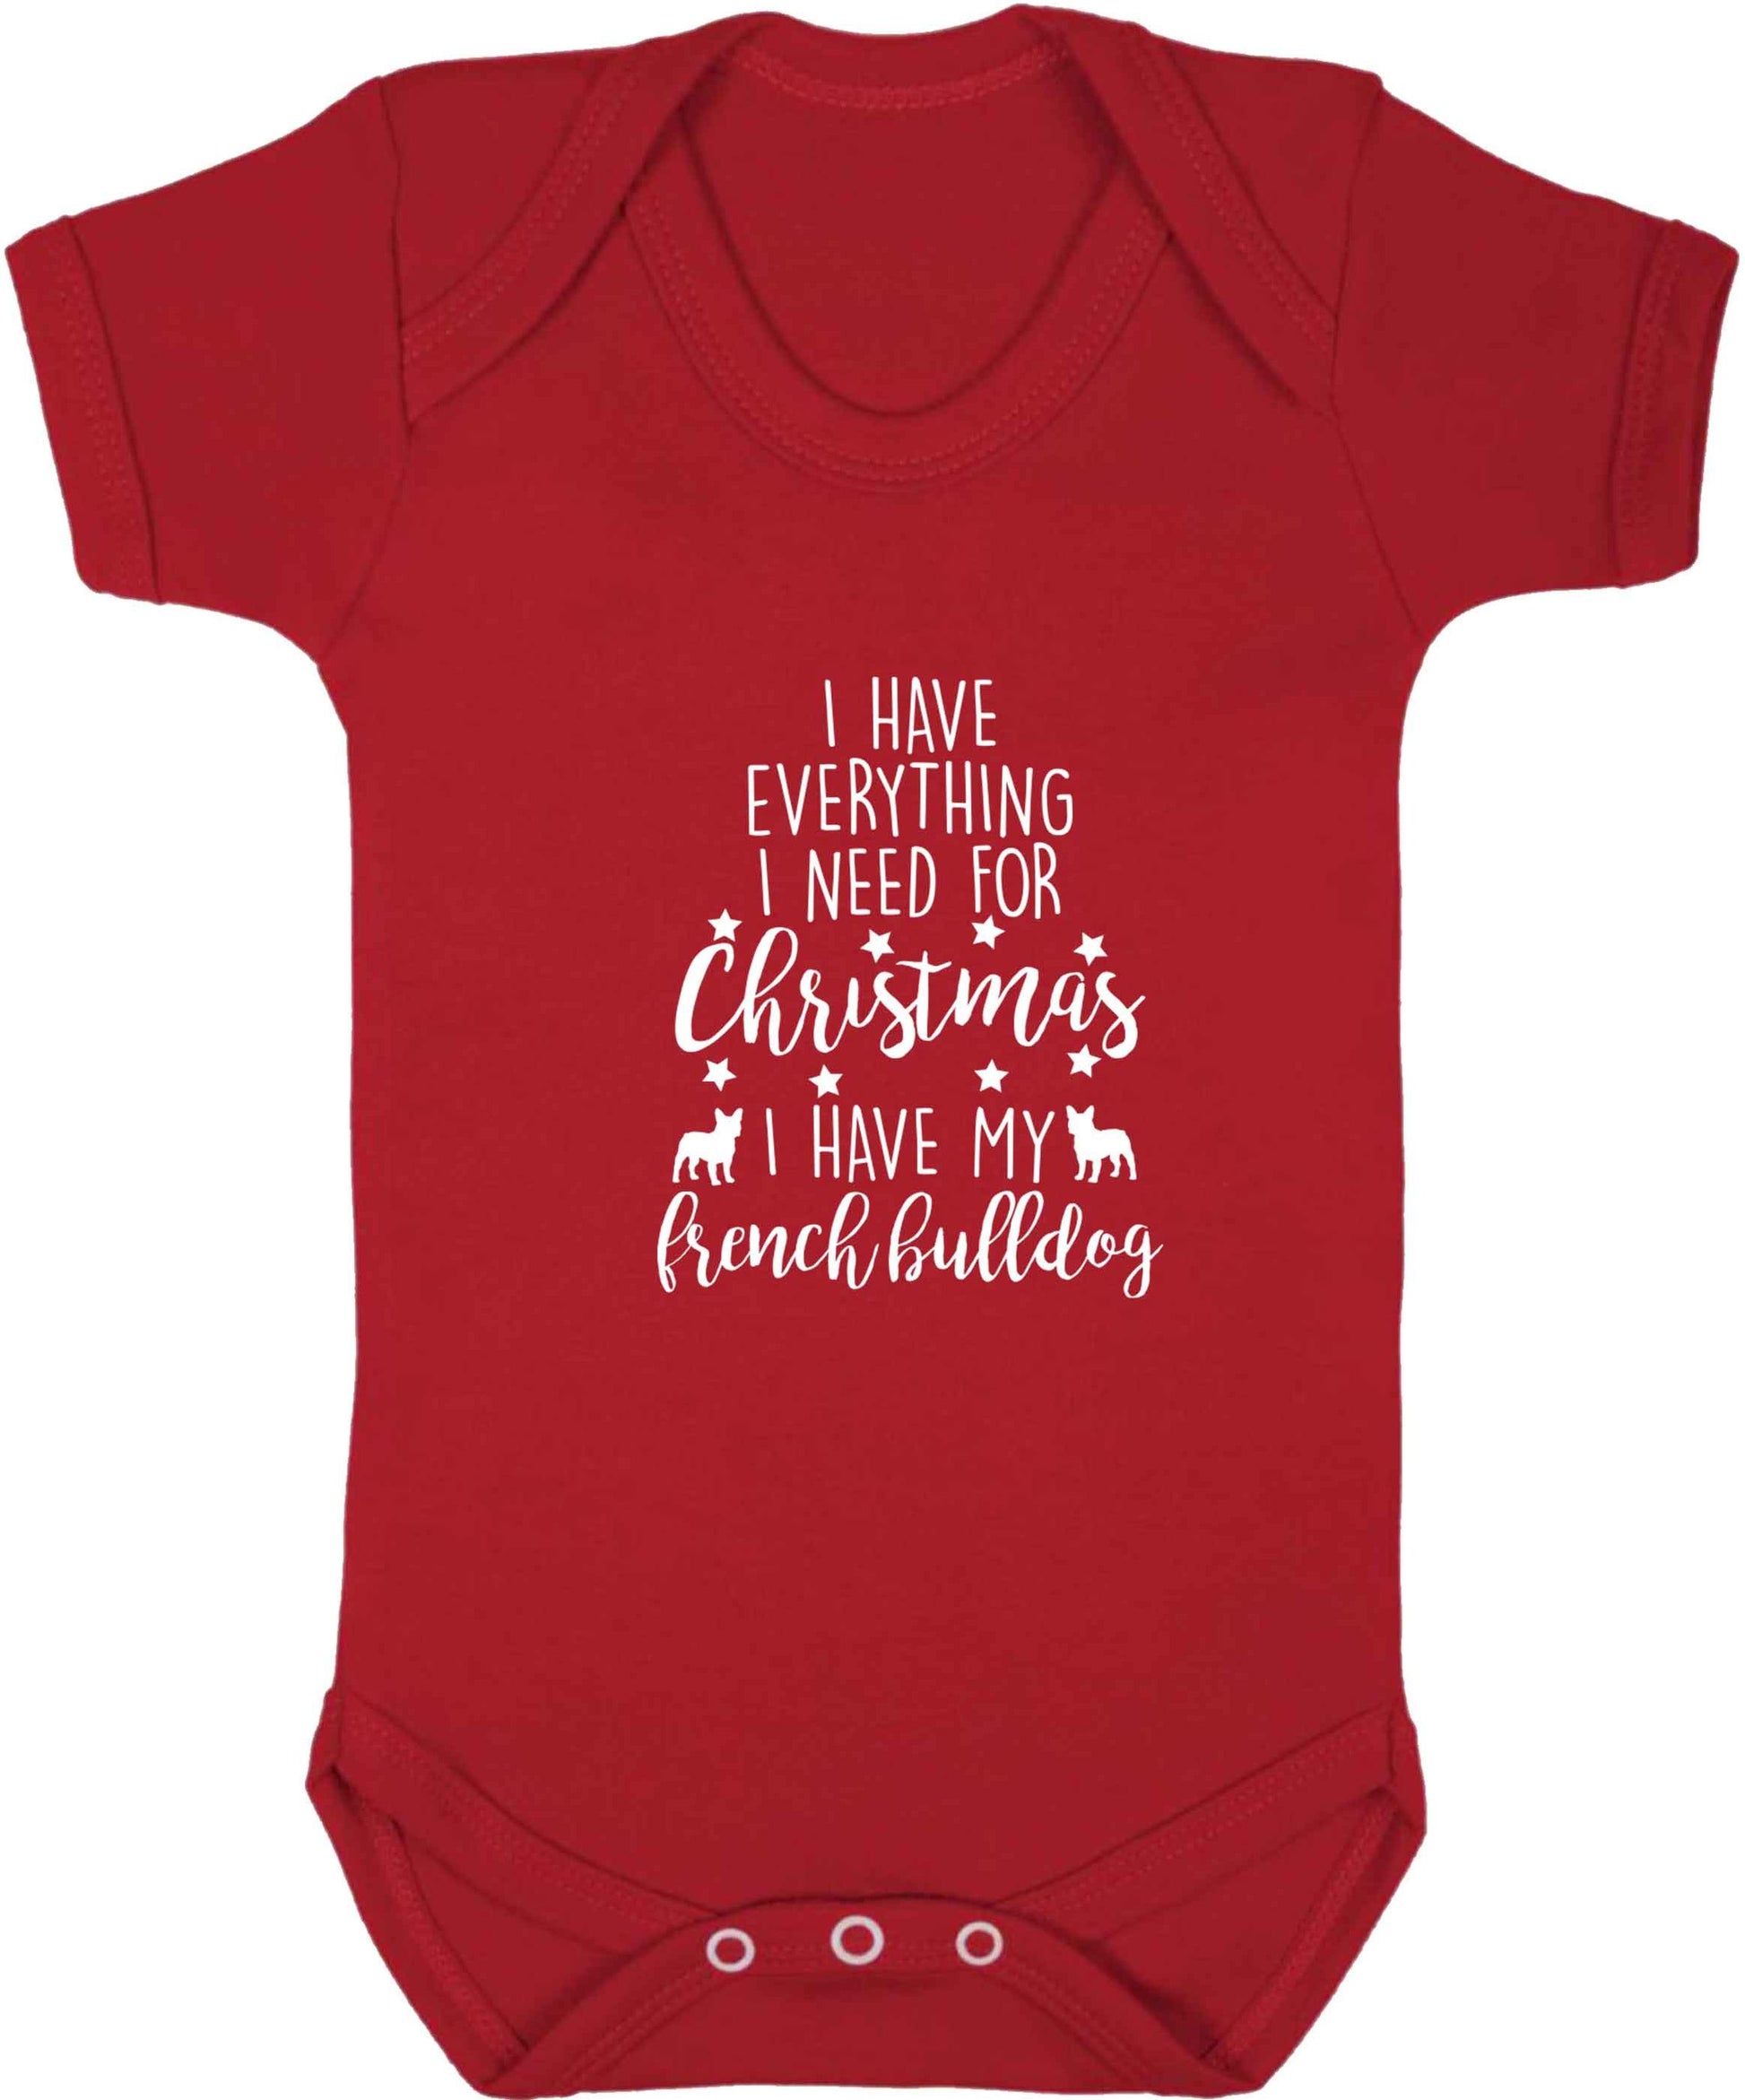 I have everything I need for Christmas I have my french bulldog baby vest red 18-24 months